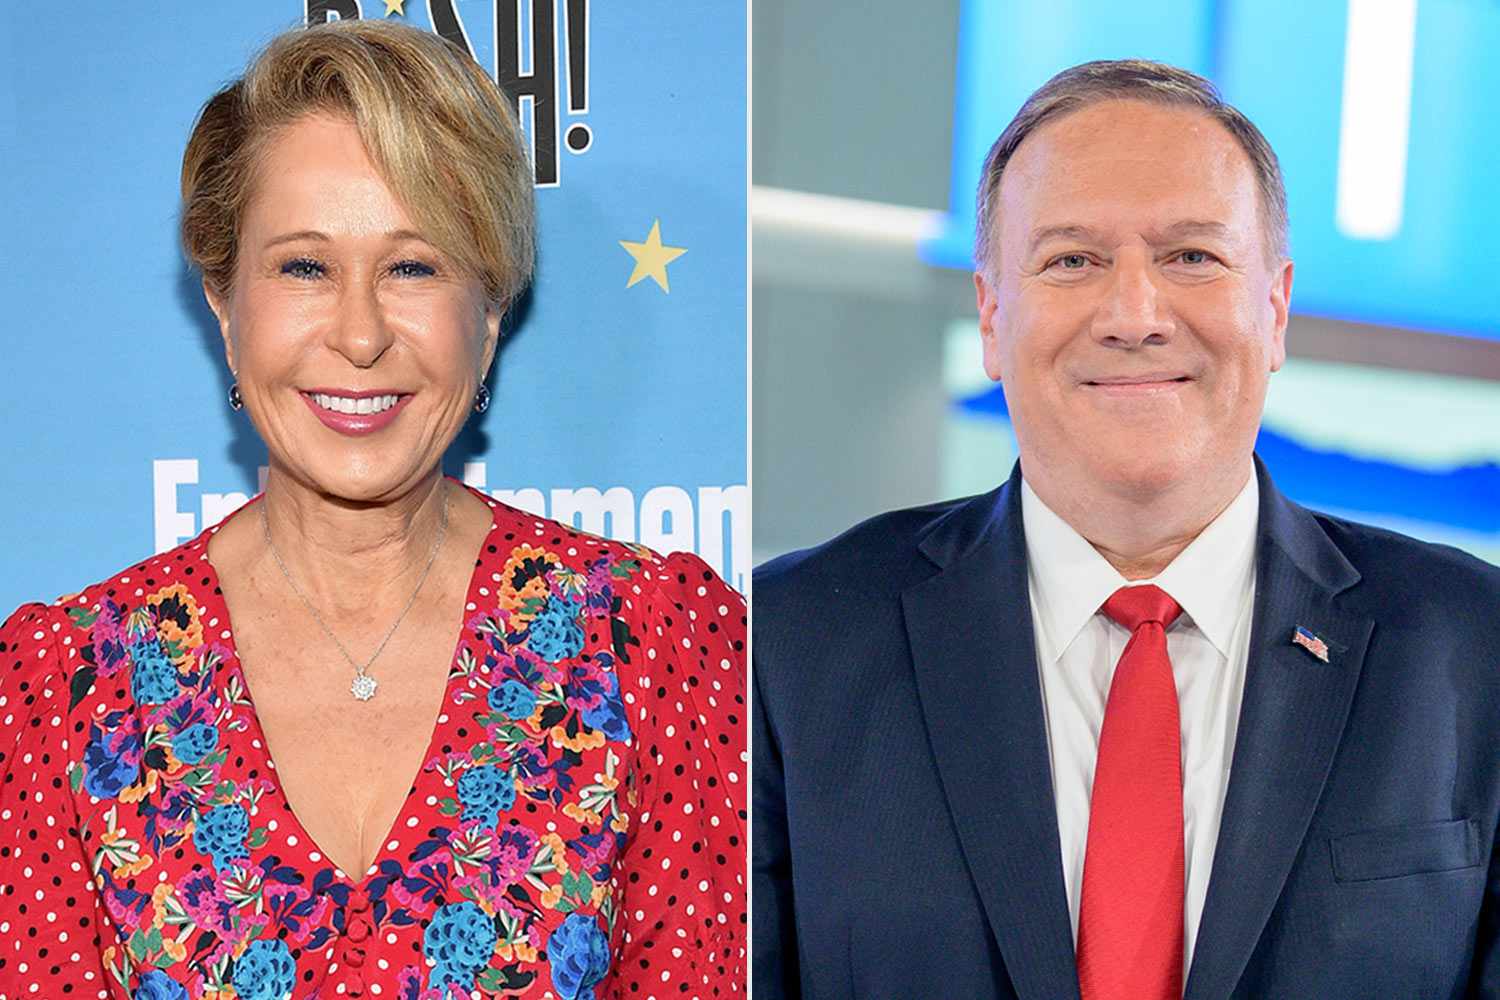 Yeardley Smith and Mike Pompeo